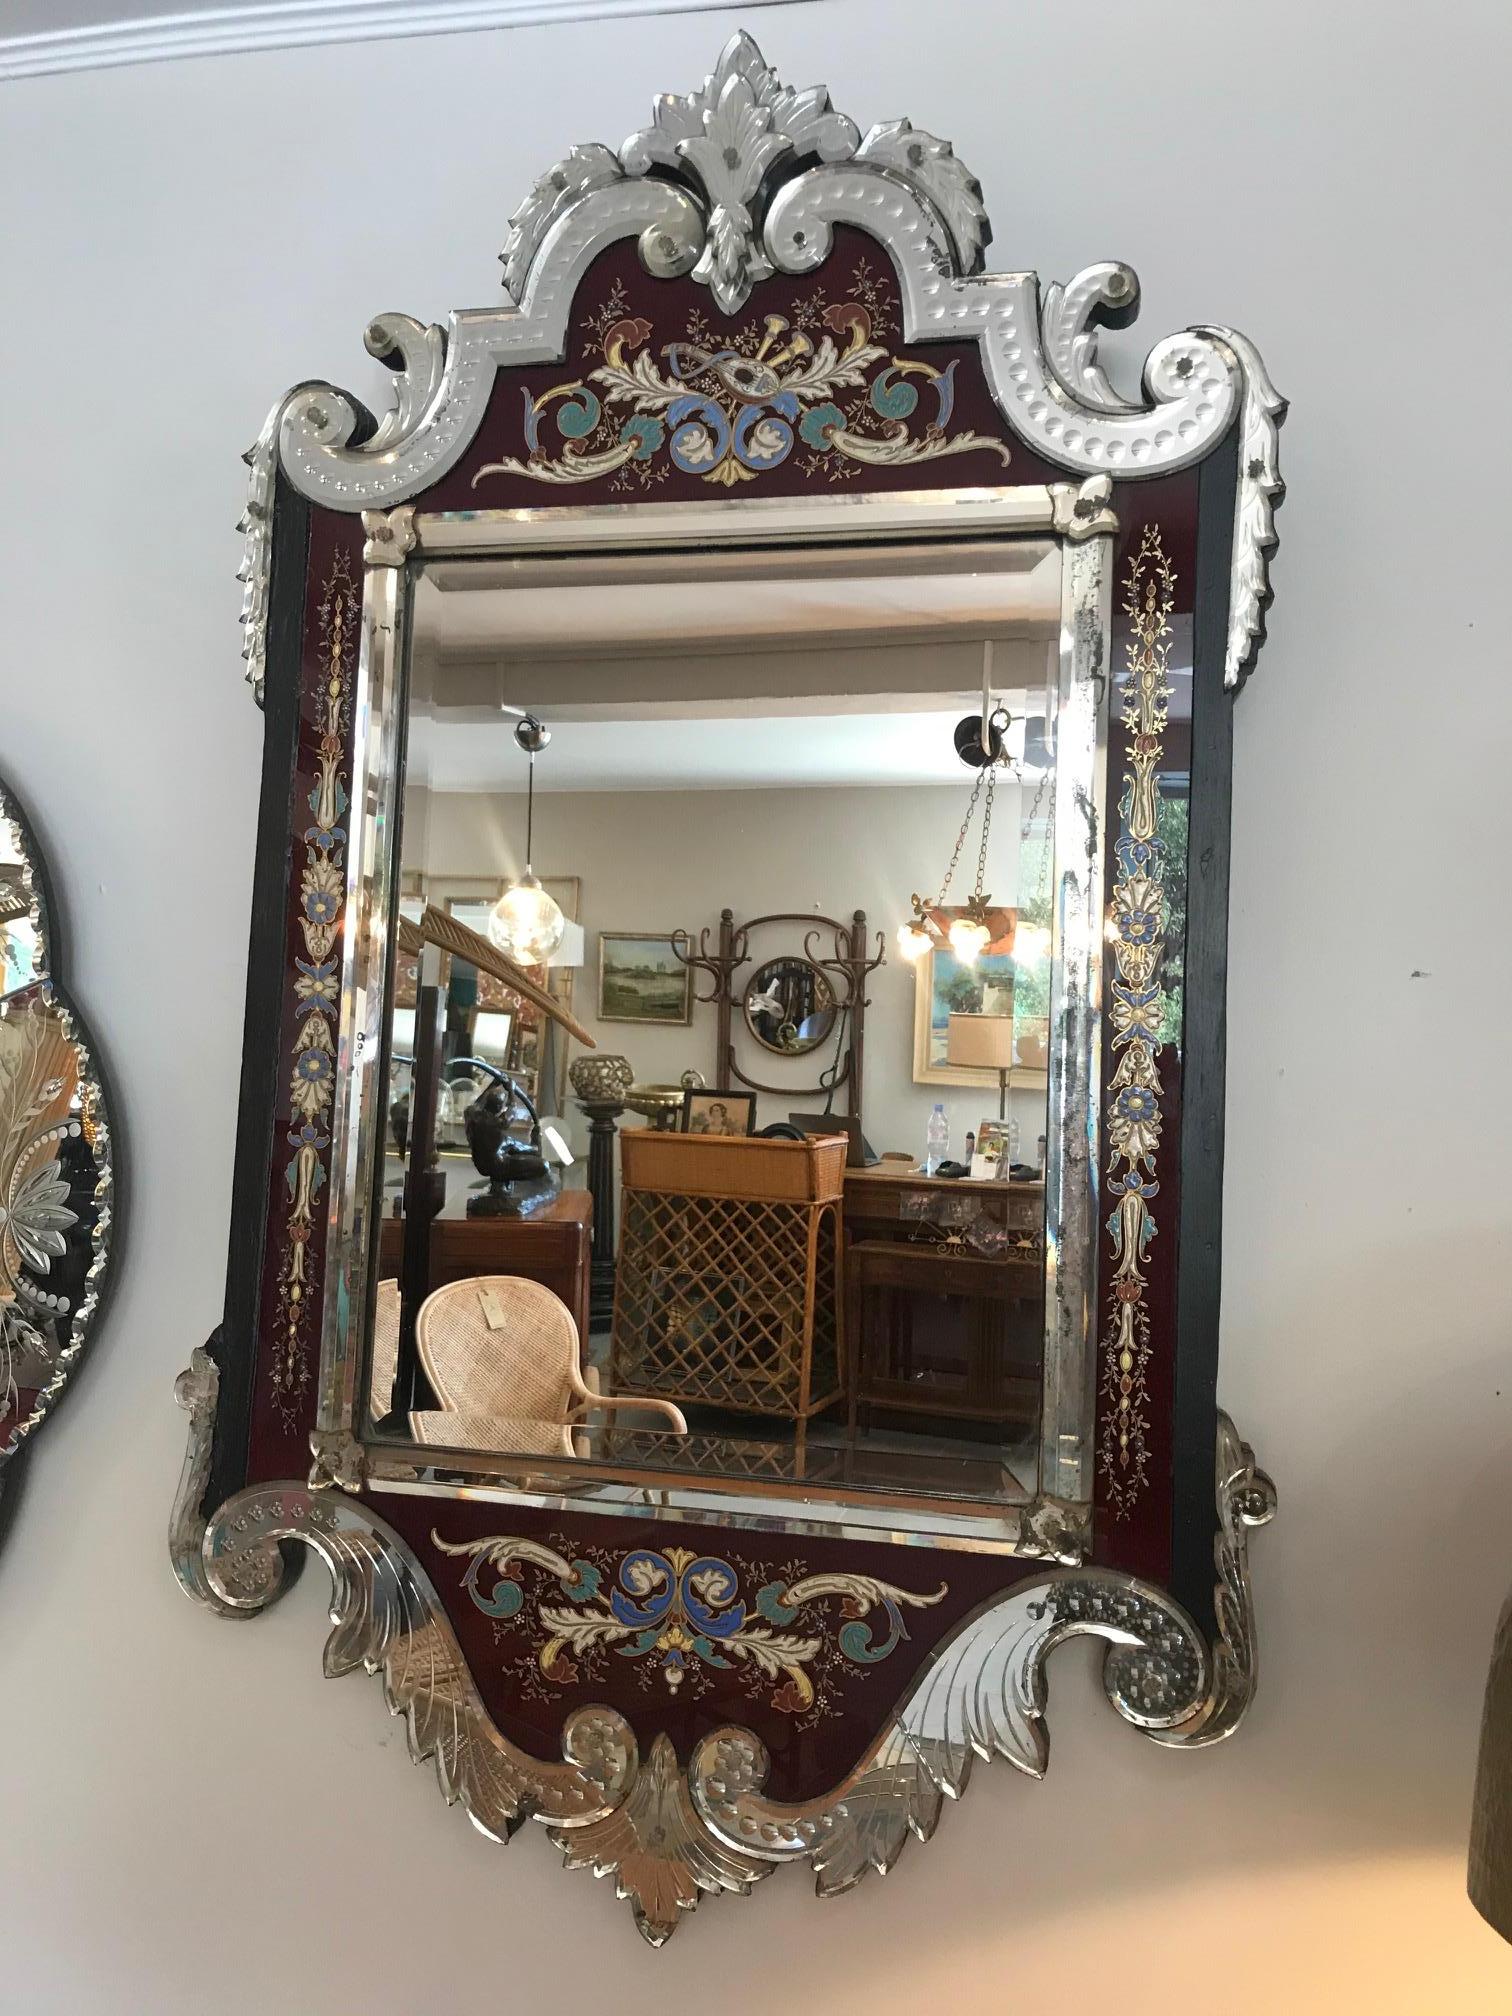 Rare and spectacular 19th century Napoleon III period Venetian mirror.
enameled painted flowers and musical instrument on the red glass.
Very elegant work. Beveled mirror on the center.
One minor glass damage on the left bottom glass ornament but